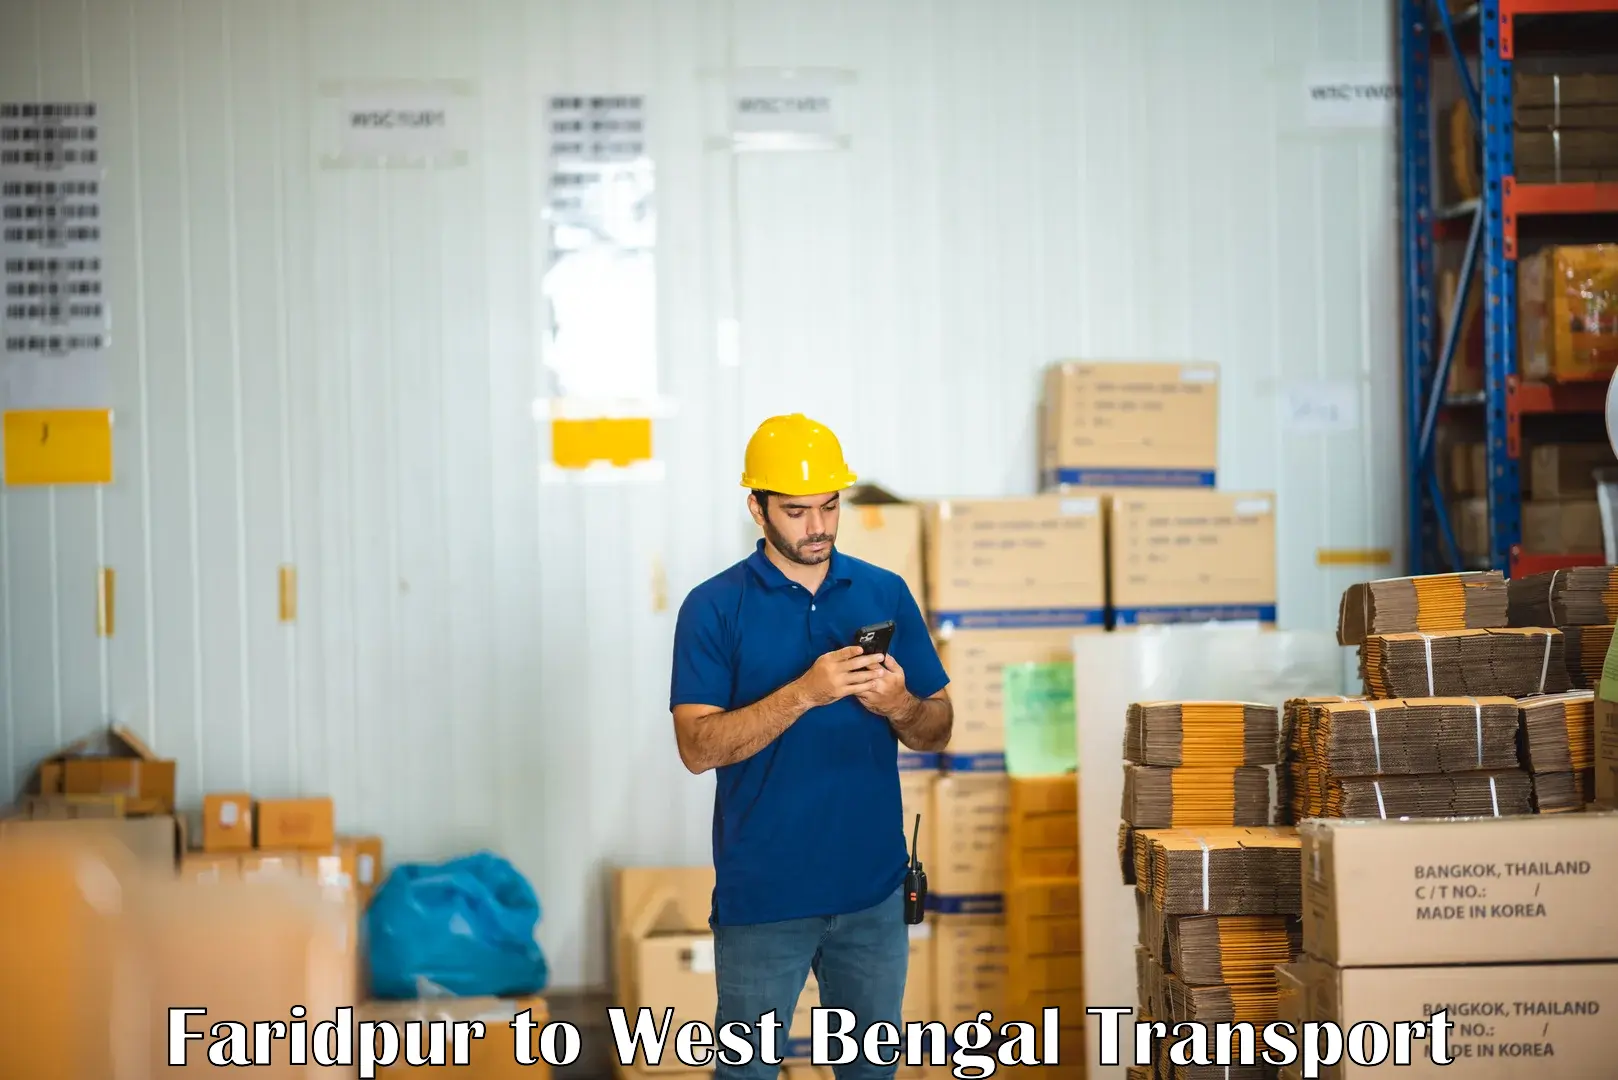 Transport in sharing in Faridpur to West Bengal